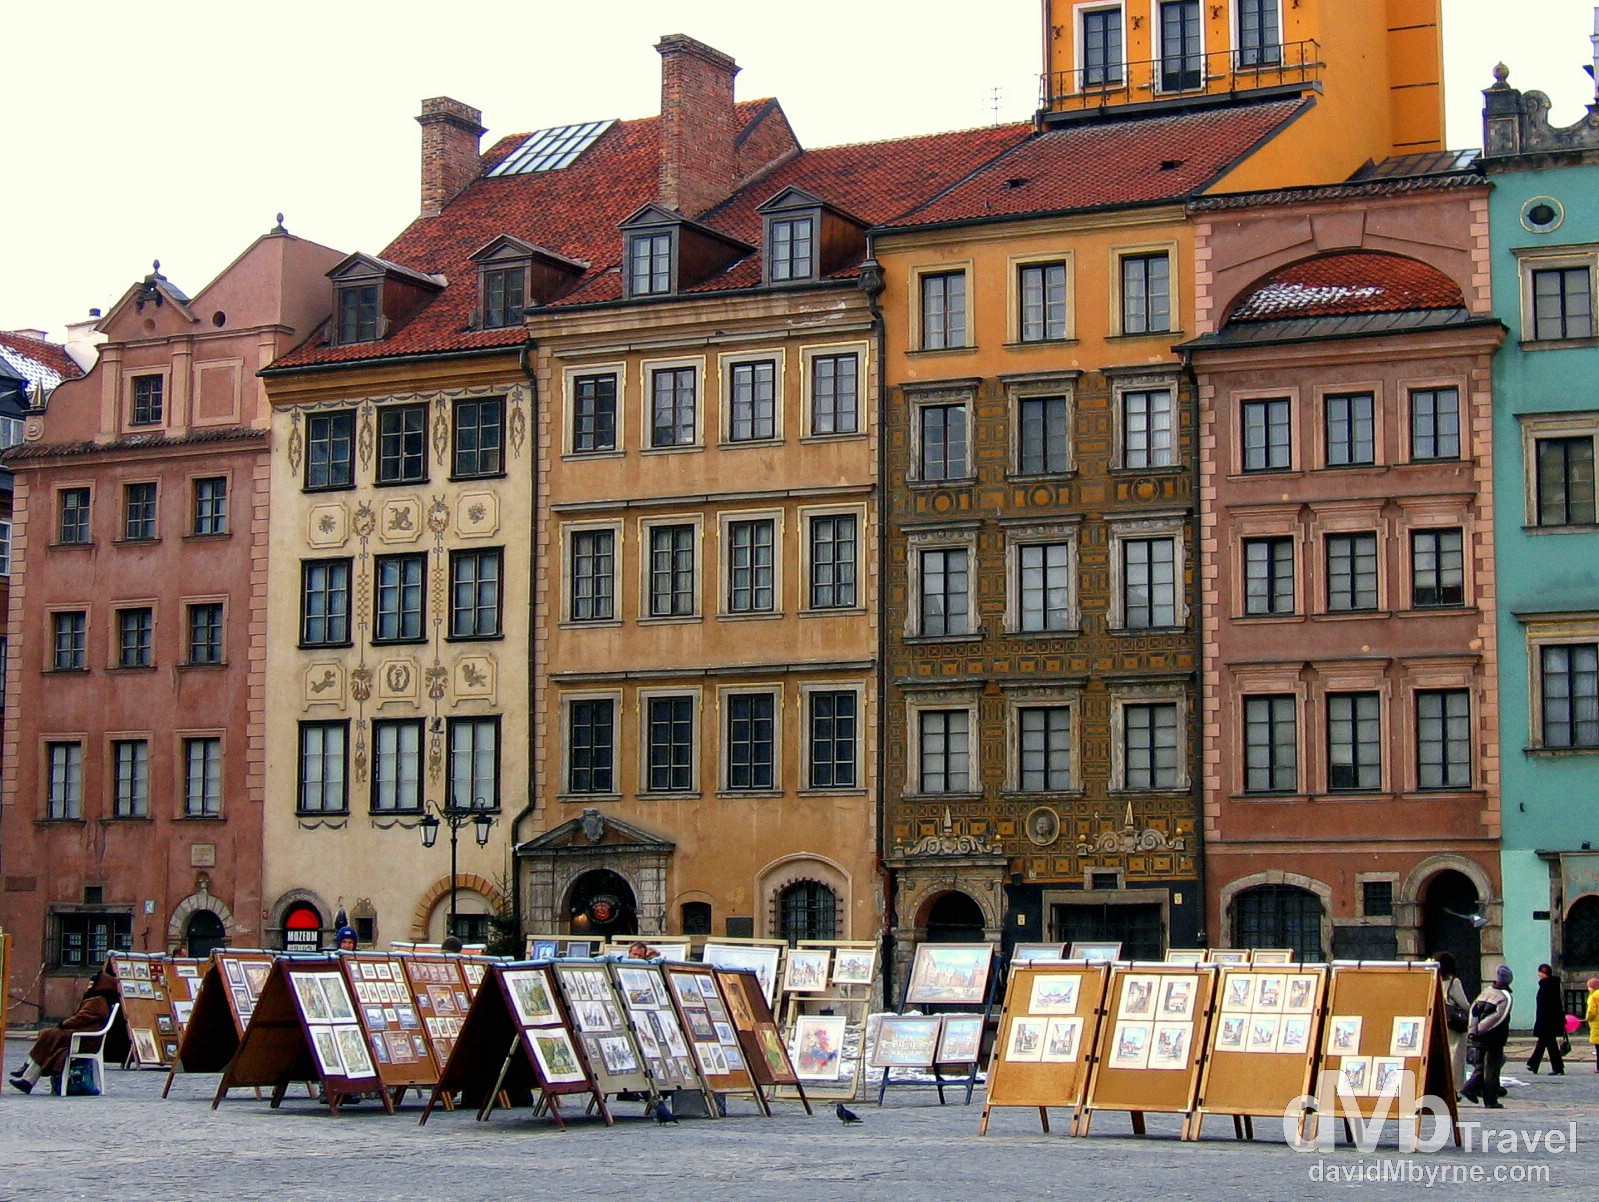 The varying colours of an outdoor art market in Old Town Square, Old Town, Warsaw, Poland. March 5th 2006.